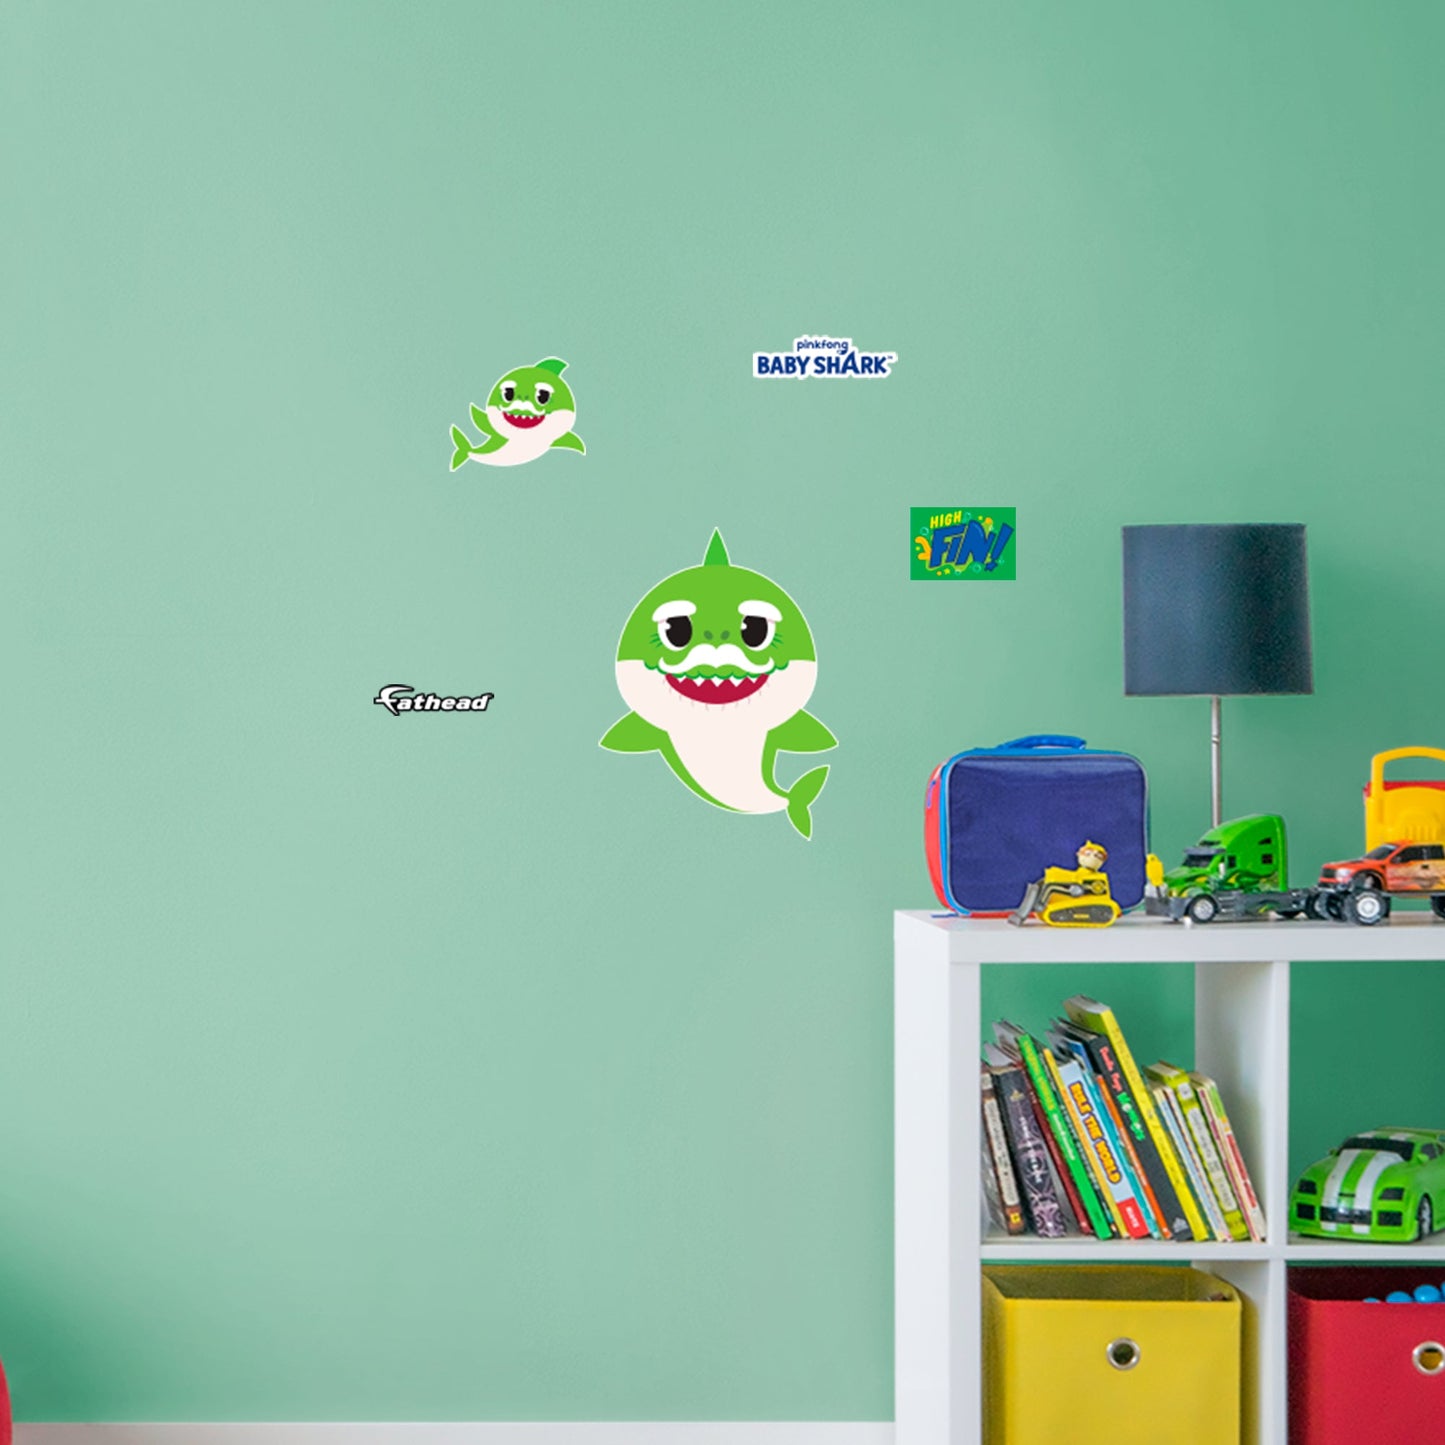 Baby Shark: Grandpa Shark RealBig - Officially Licensed Nickelodeon Removable Adhesive Decal